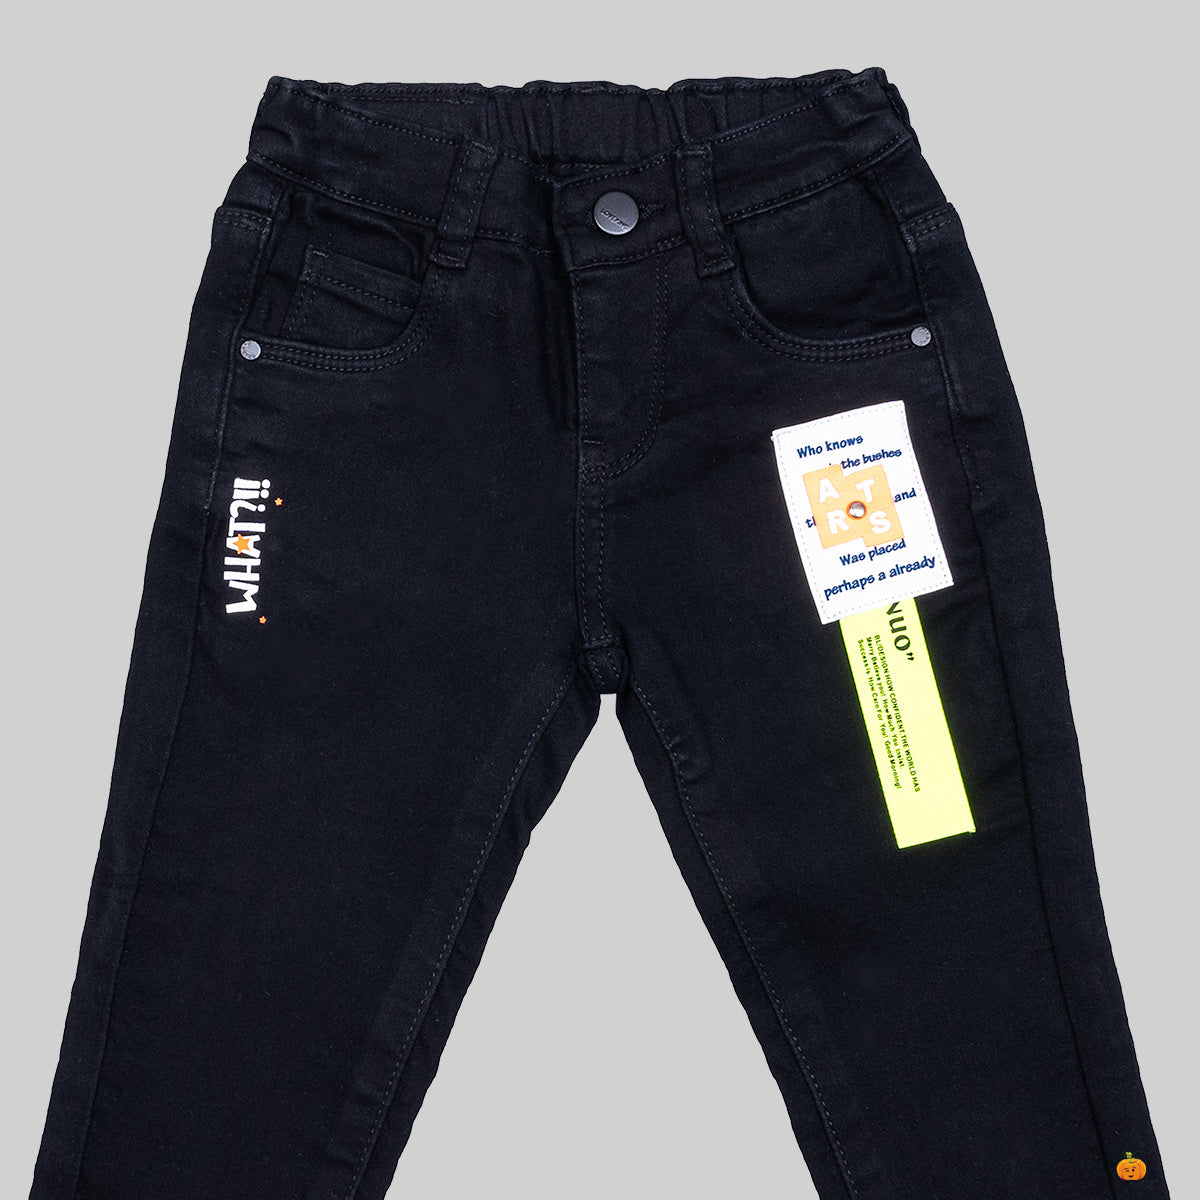 Plain Original Jeans, Black at Rs 600/piece in Hyderabad | ID: 23294183330